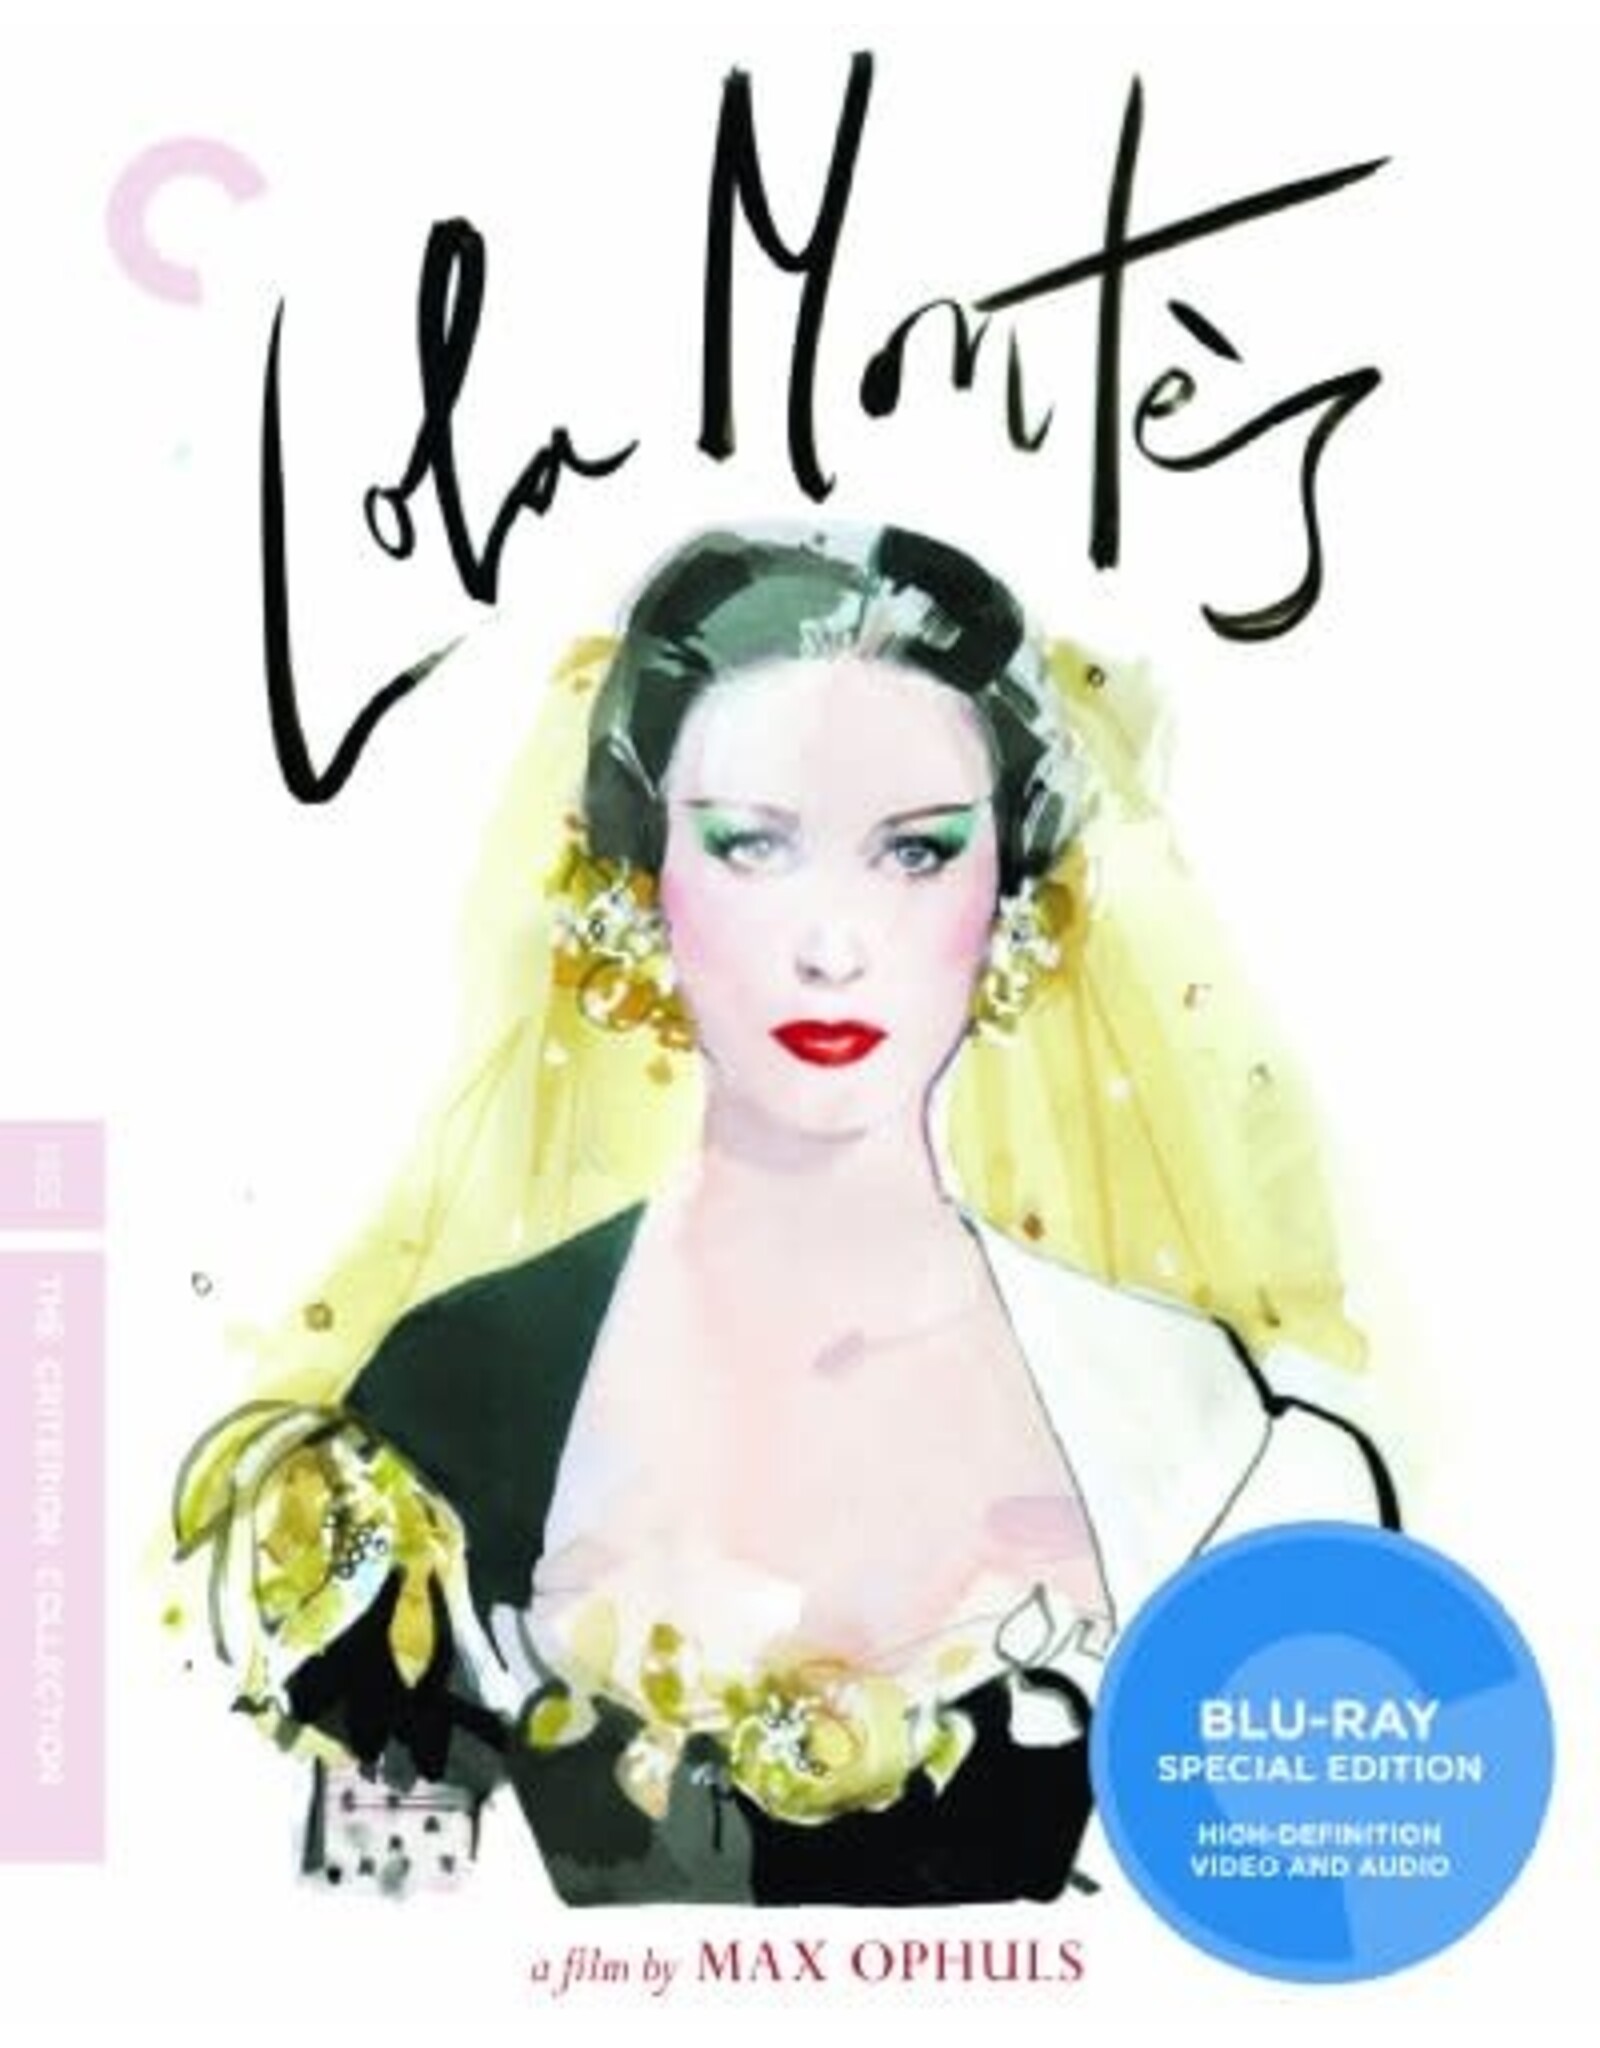 Criterion Collection Lola Montes - Criterion Collection (Brand New)